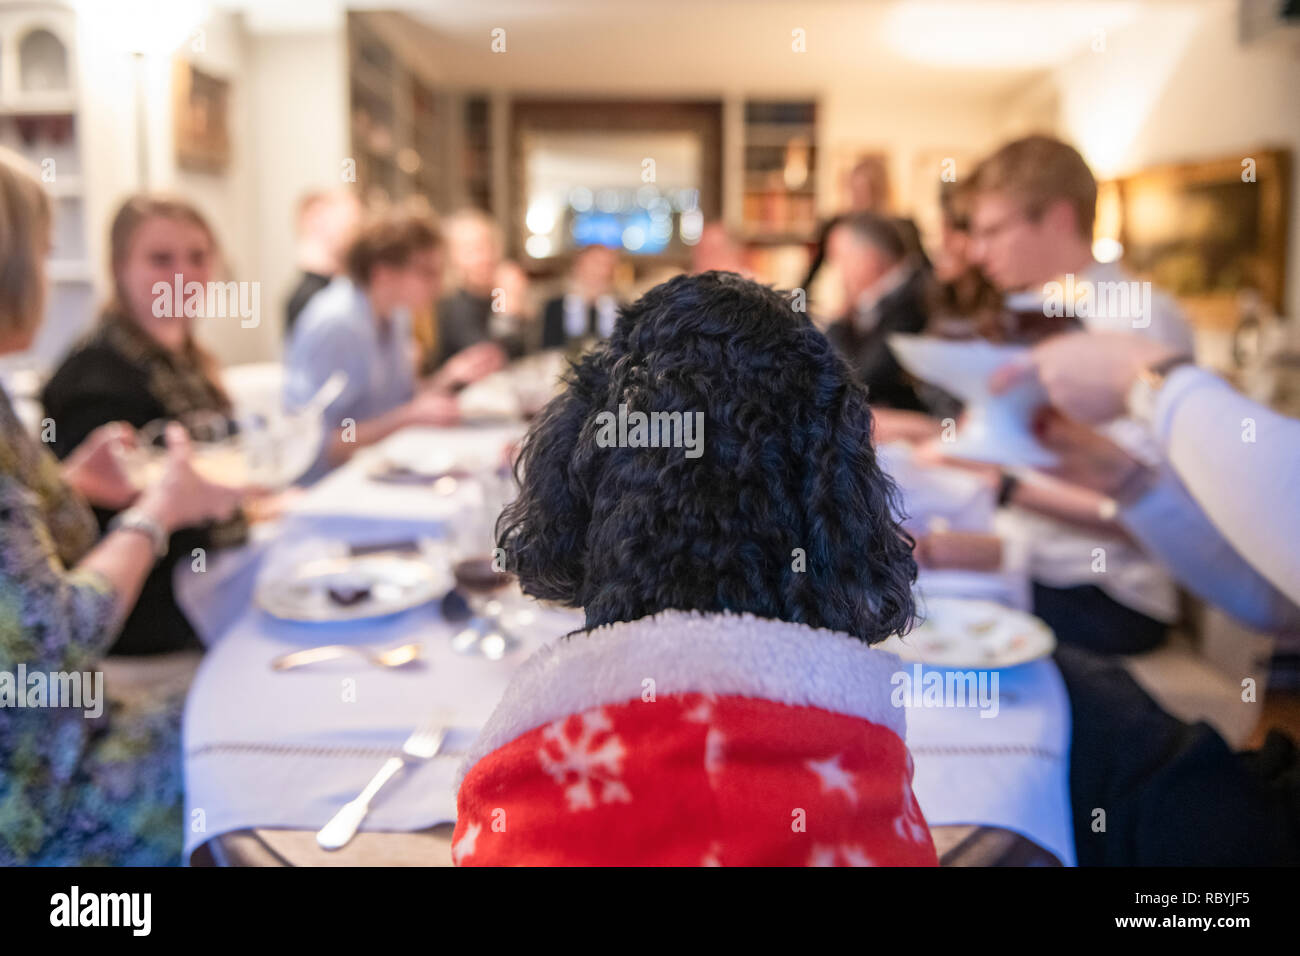 A small dog in a Christmas suit presides over Christmas lunch Stock Photo